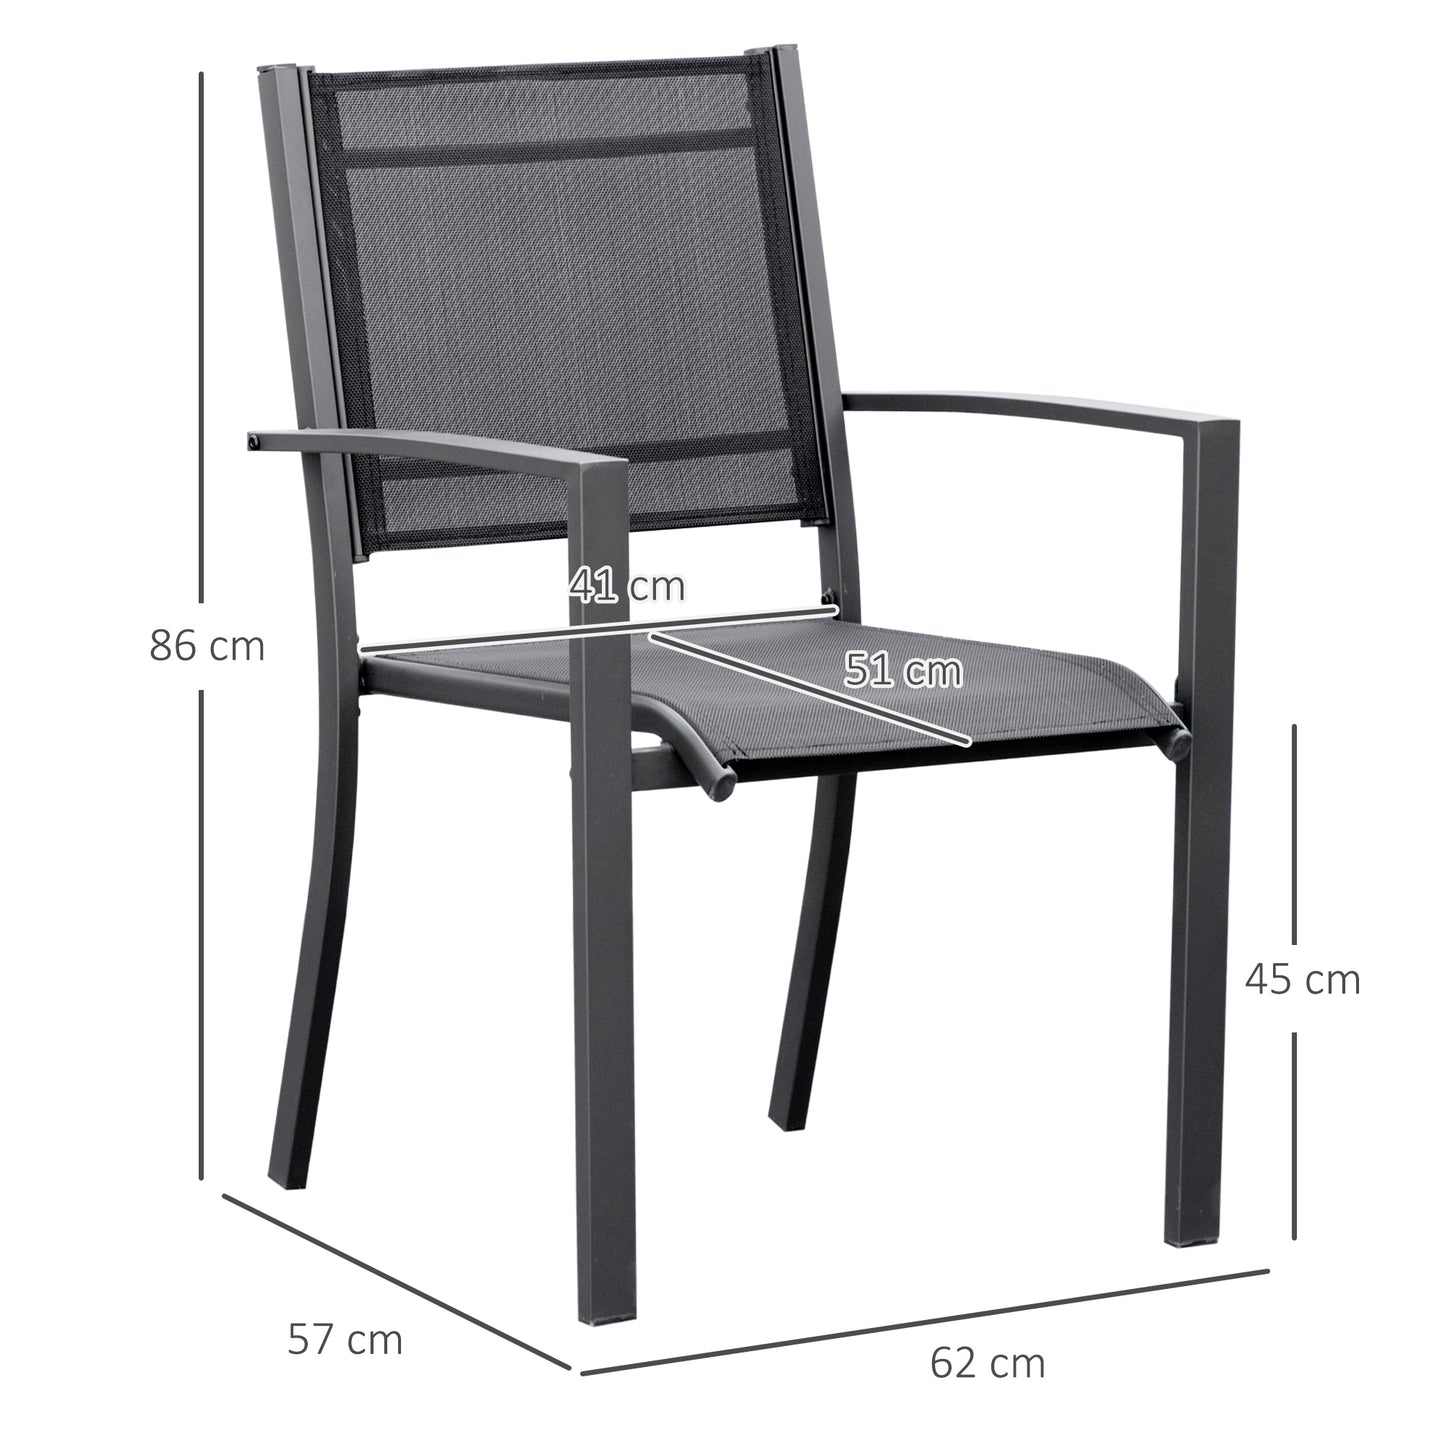 Outsunny Garden Chairs Set Of 2 Outdoor Chairs with Steel Frame Texteline Seats for Dining Patio Balcony Dark Grey Black